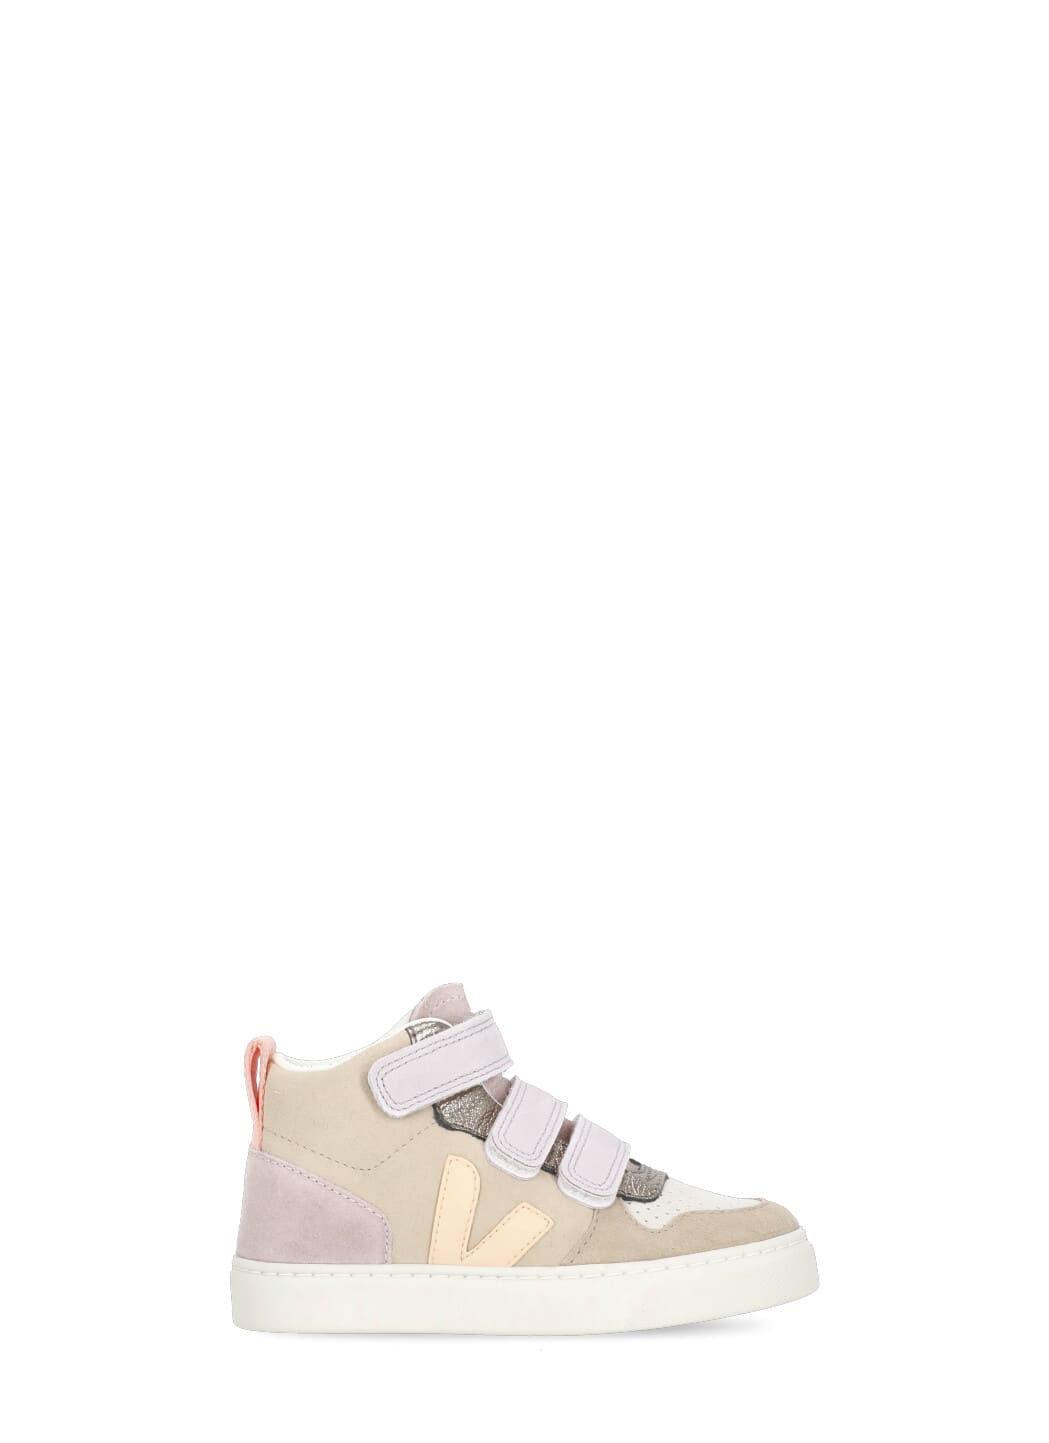 Veja Suede Leather High Sneakers